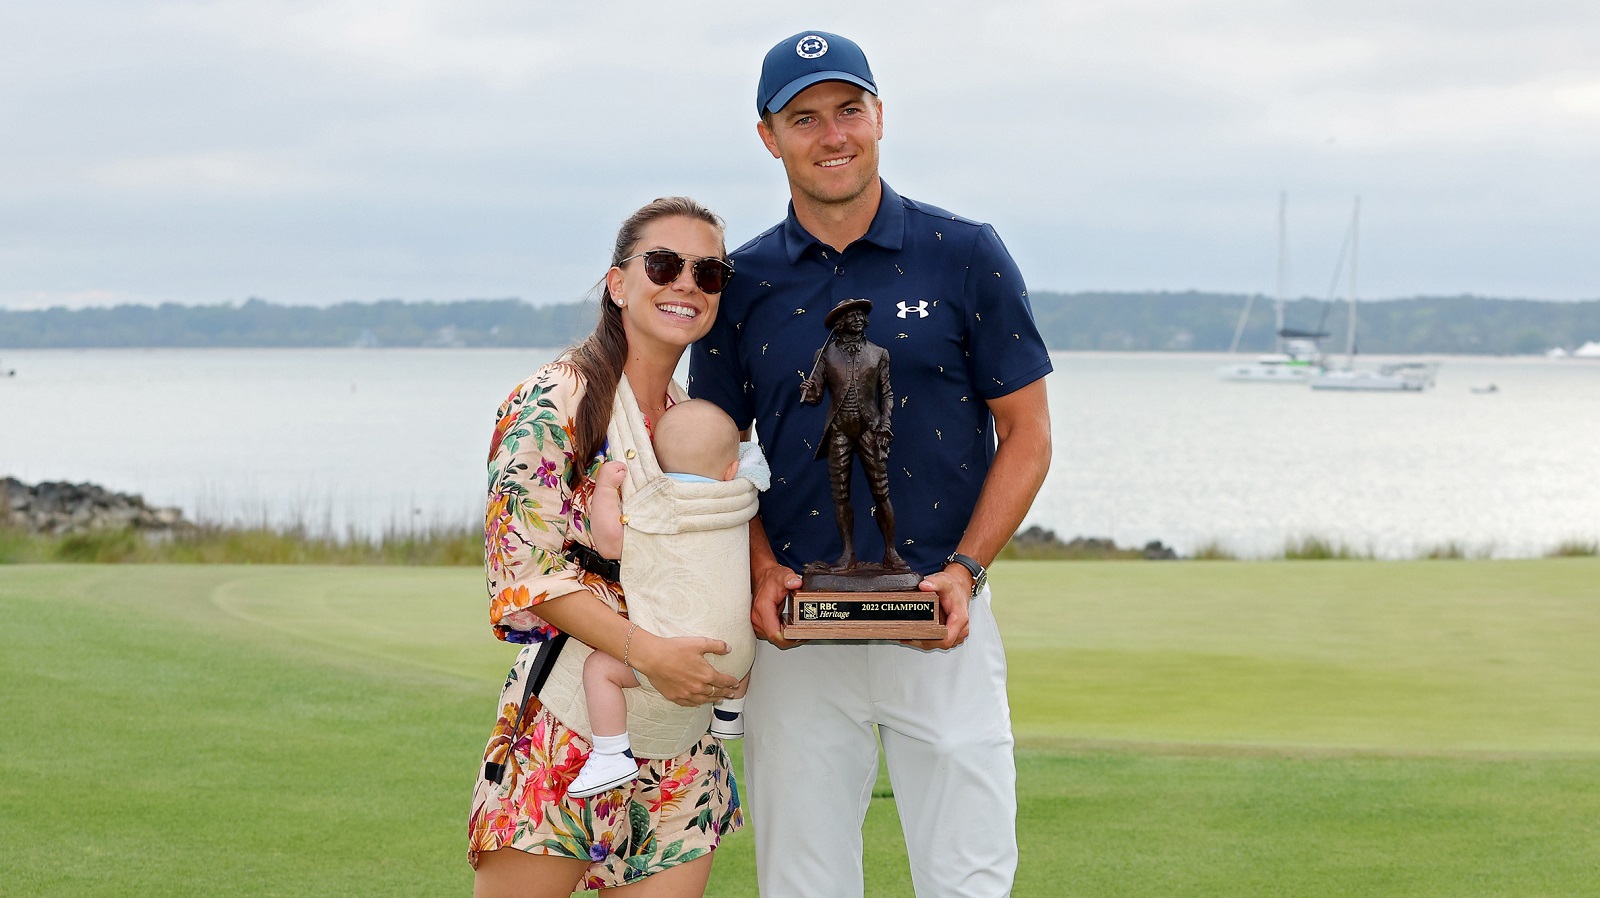 Jordan Spieth poses with the trophy with wife Annie Verret and son Sammy Spieth after winning the RBC Heritage on April 17, 2022, in Hilton Head Island, South Carolina. | Kevin C. Cox/Getty Images